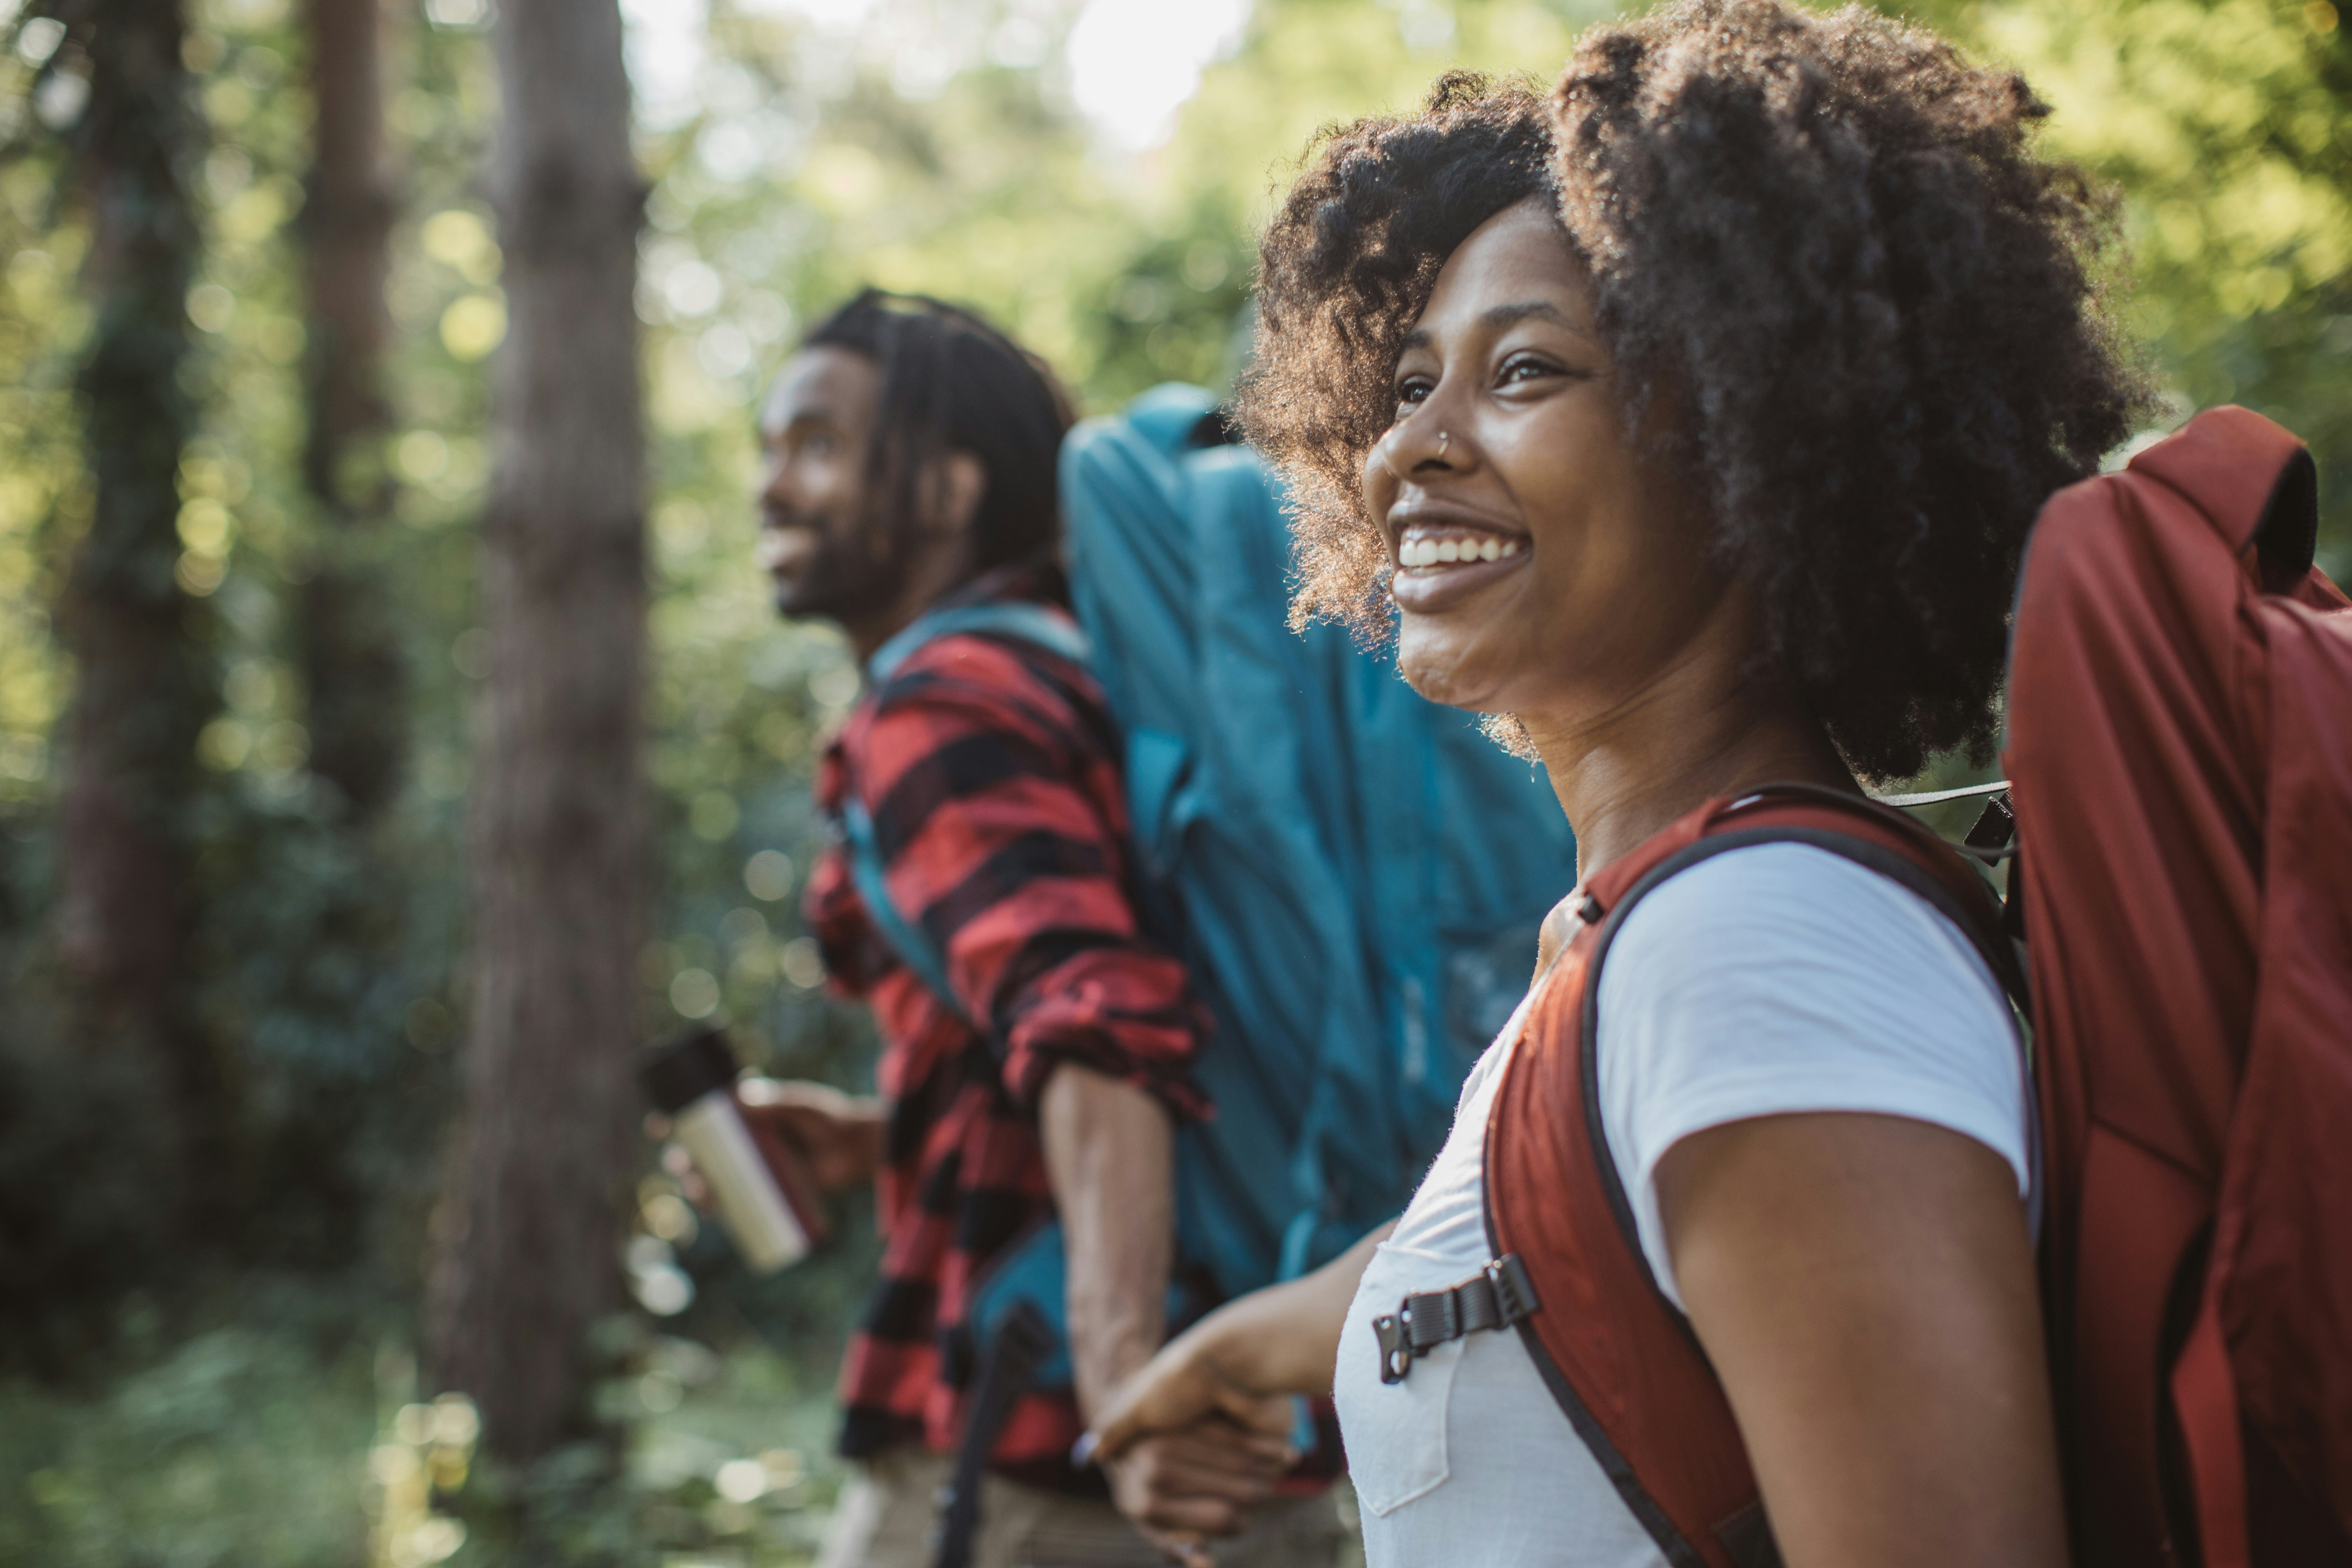 A man with locs, a red and black plaid flannel shirt, and a teal sixty liter backpack reaches for the hand of his hiking partner, who is smiling in the distance while wearing a white t-shirt and a reddish orange backpack